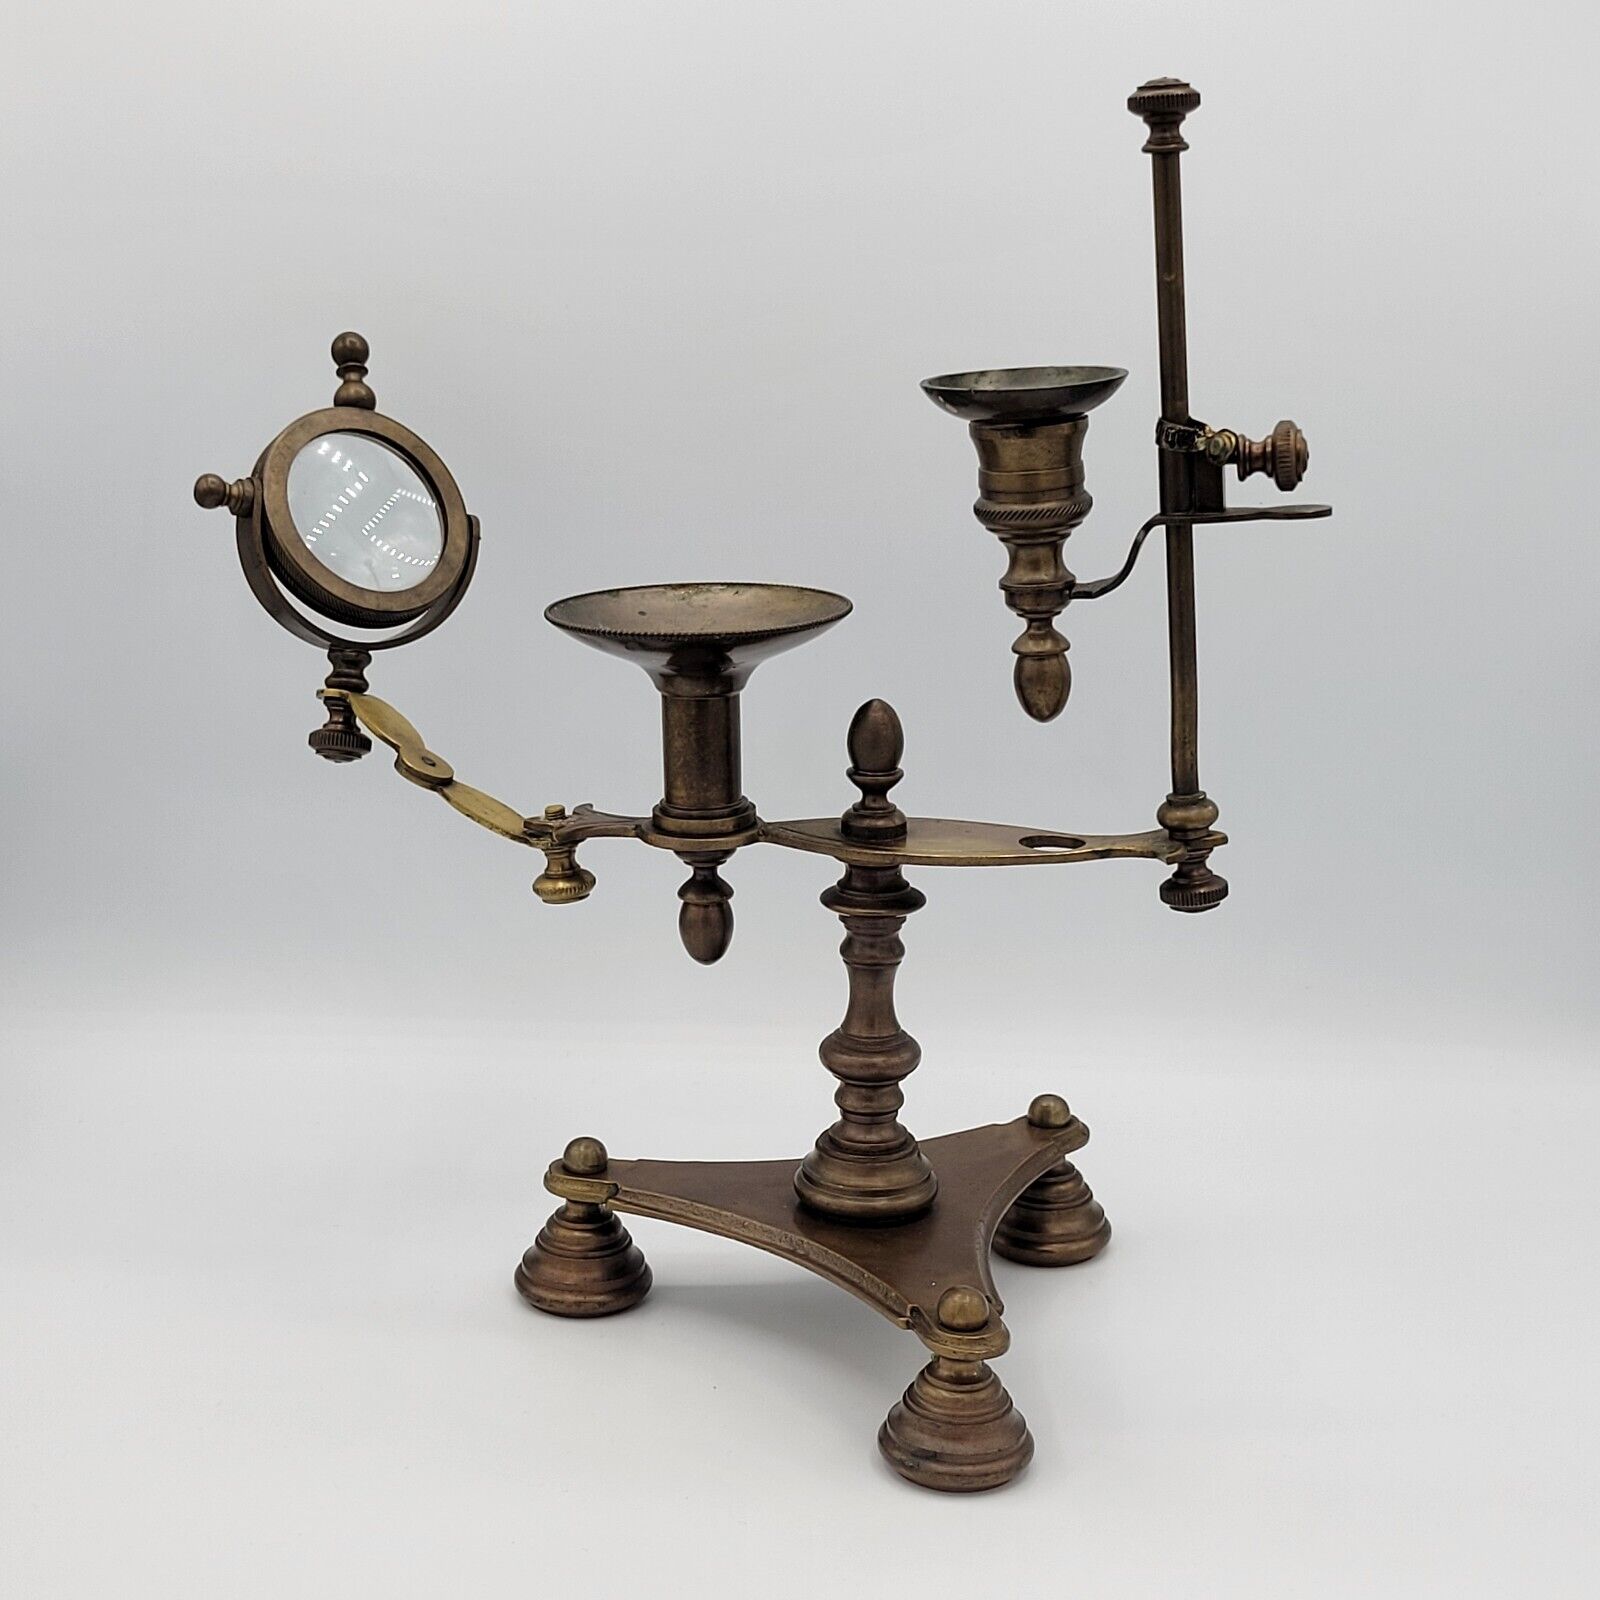 Georgian Style Brass Reading Lamp Candle Holder Scientific Instrument Magnifier